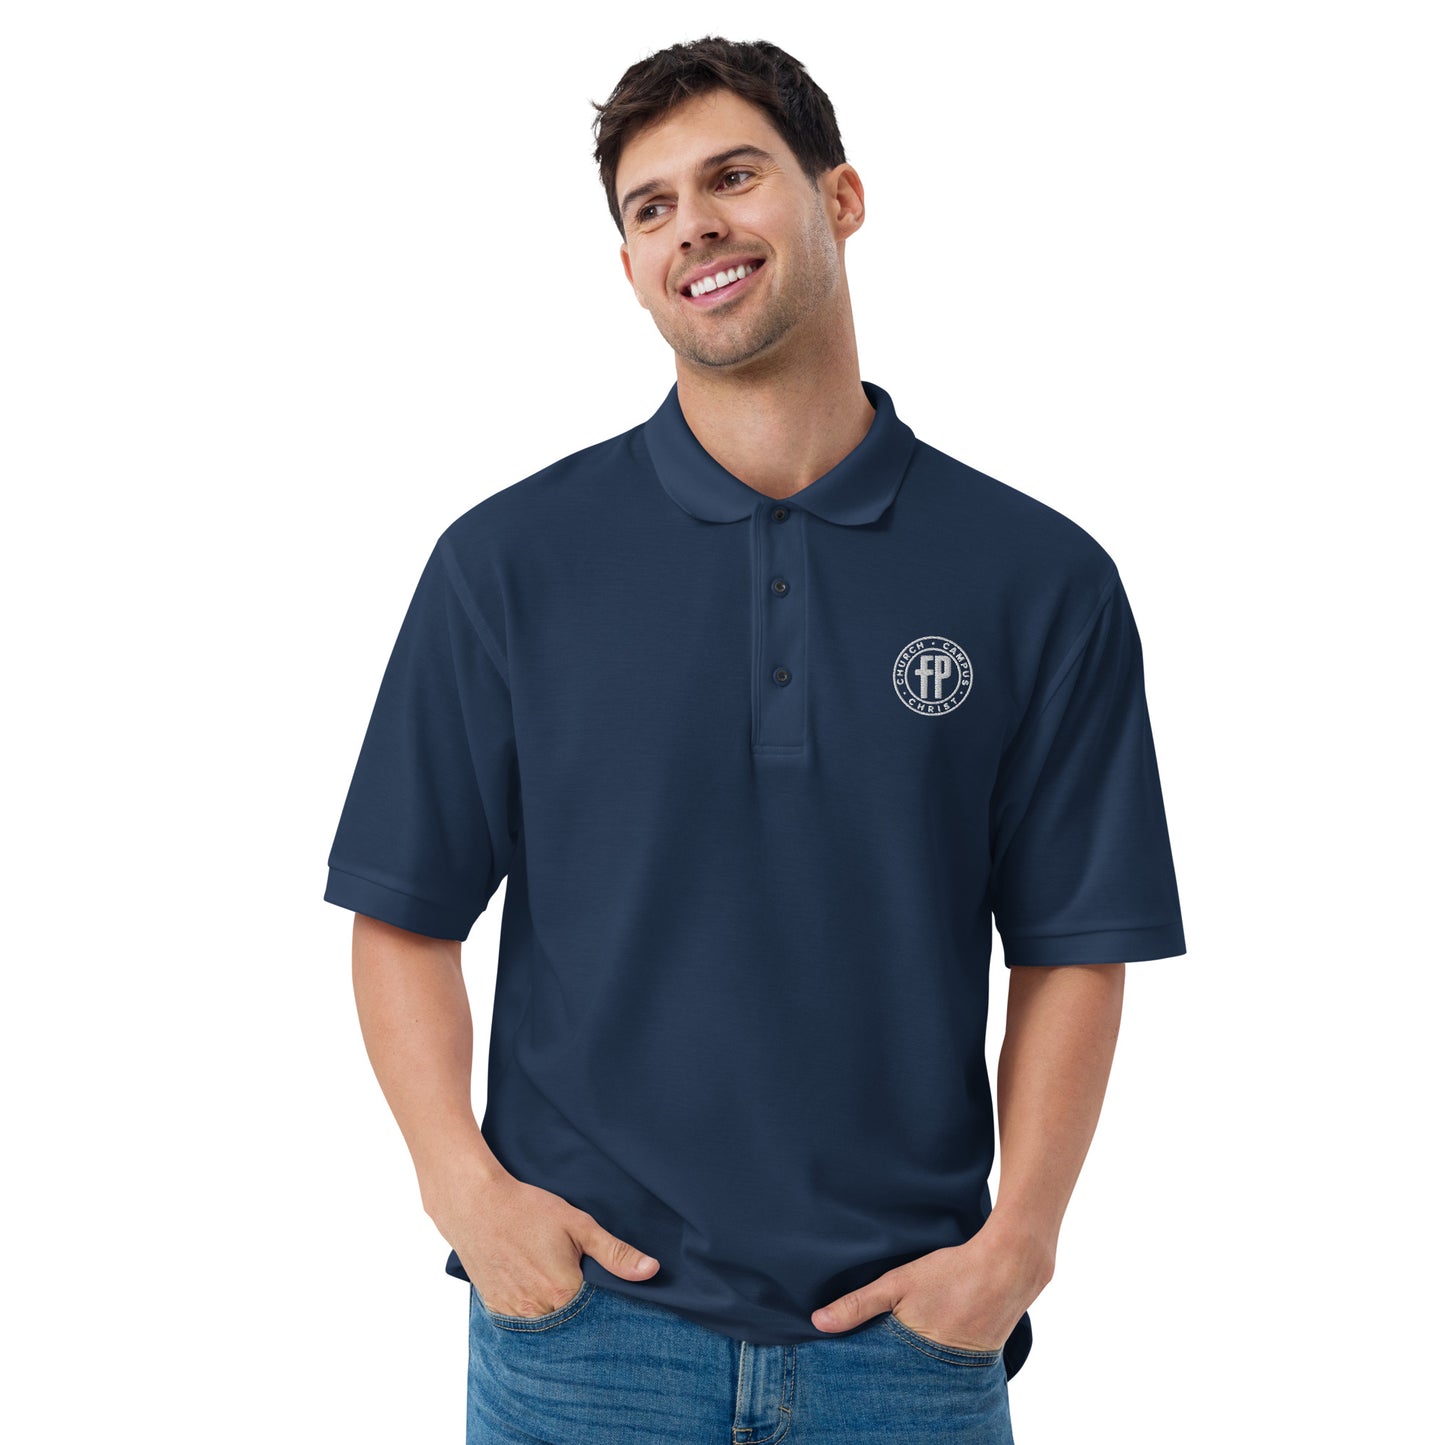 FP Polo Embroidered- 4 colors